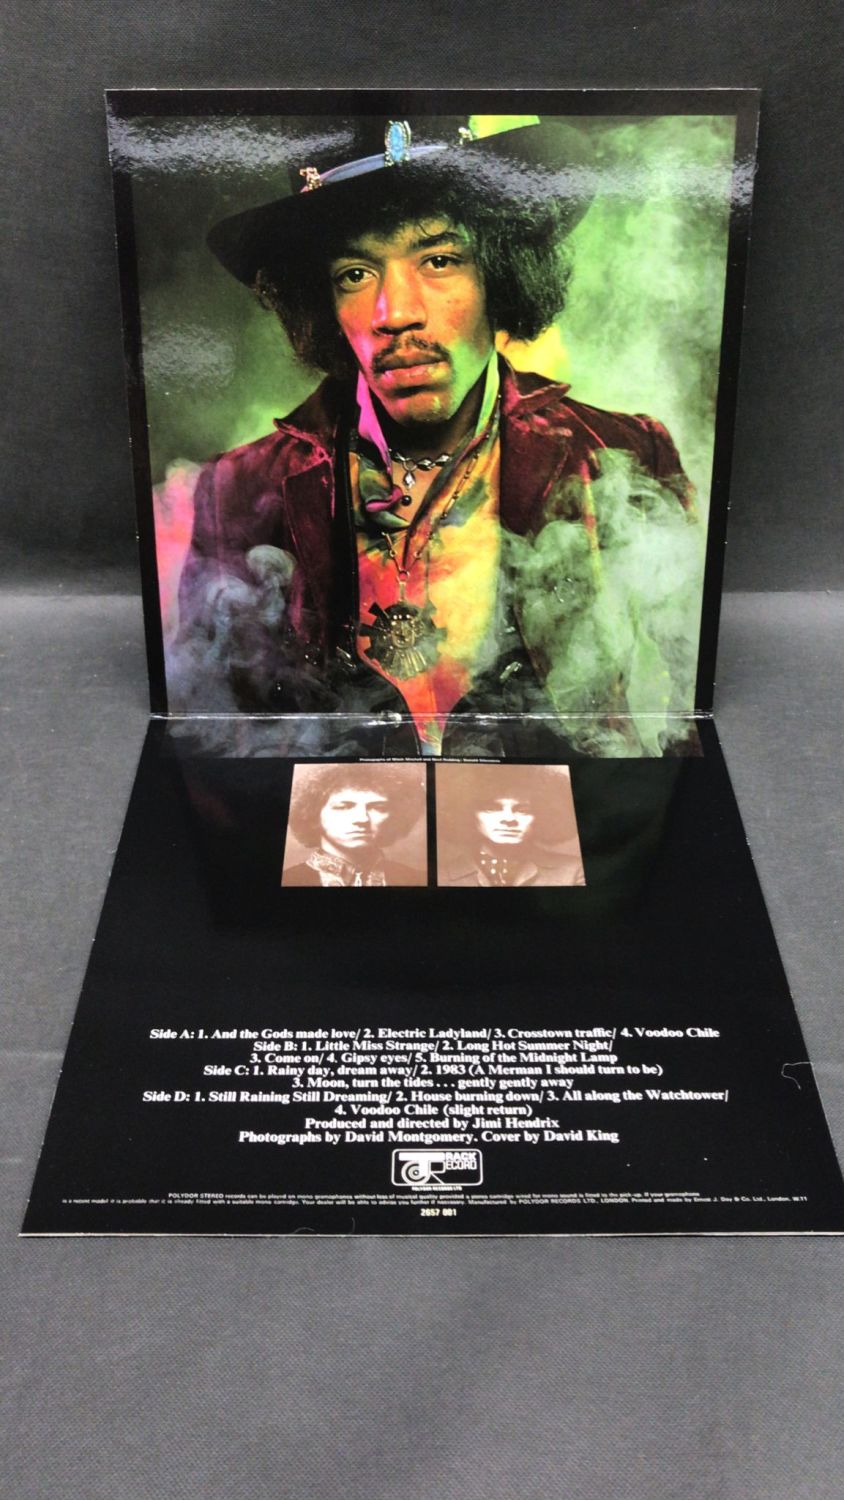 Jimi Hendrix - Electric Ladyland Unofficial re-issue (Track record 2657001) Cover and vinyl are - Image 2 of 3